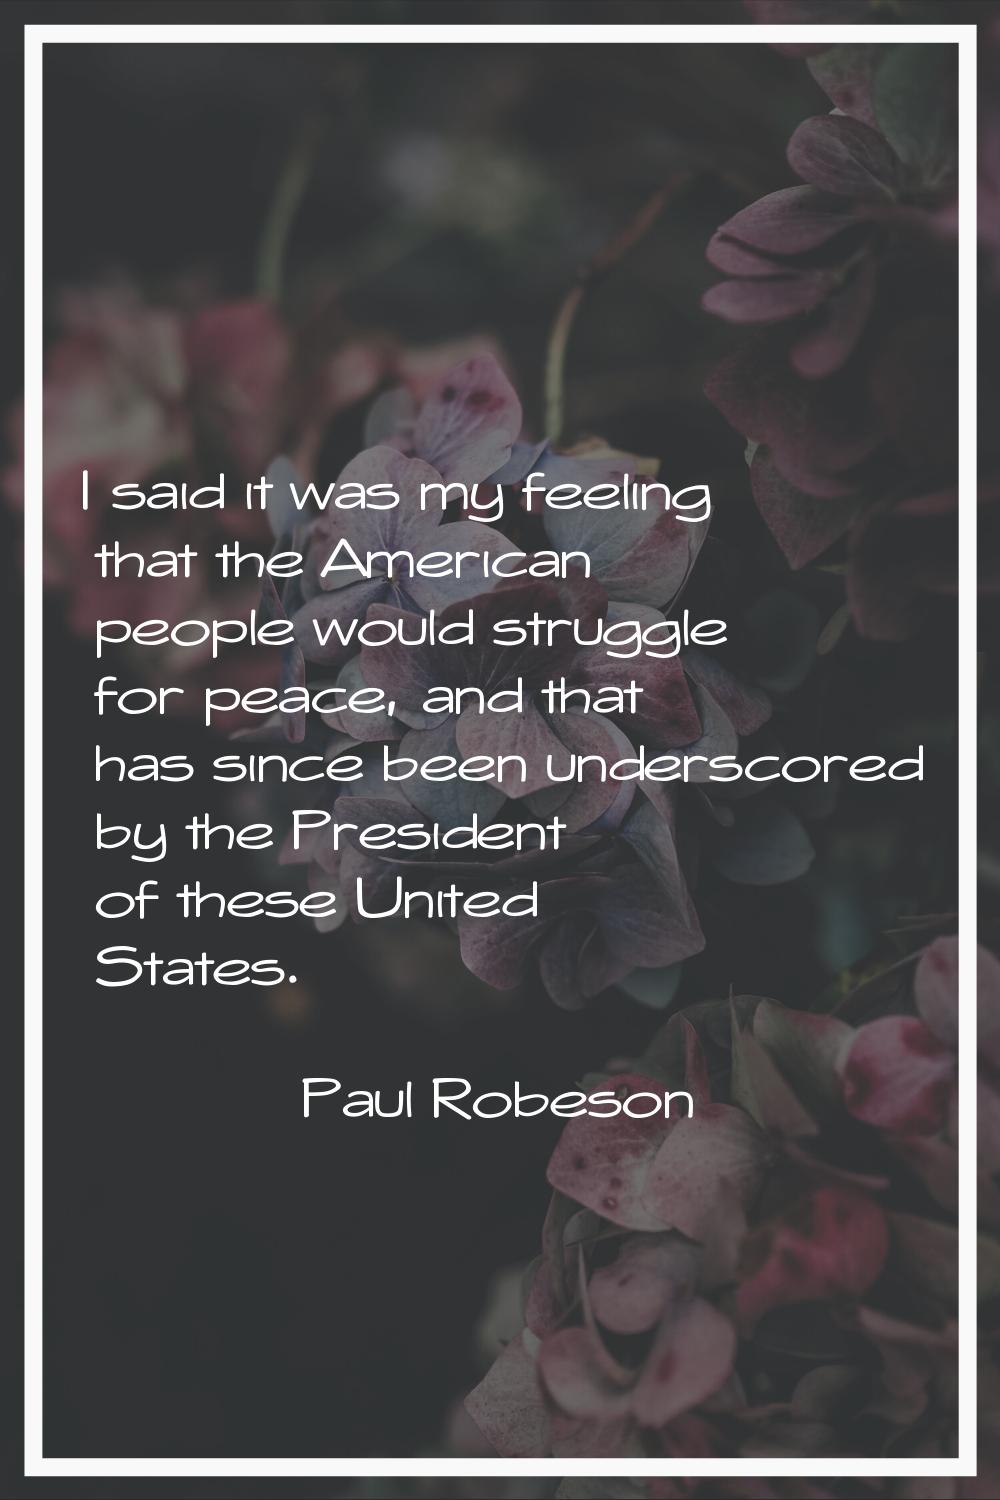 I said it was my feeling that the American people would struggle for peace, and that has since been